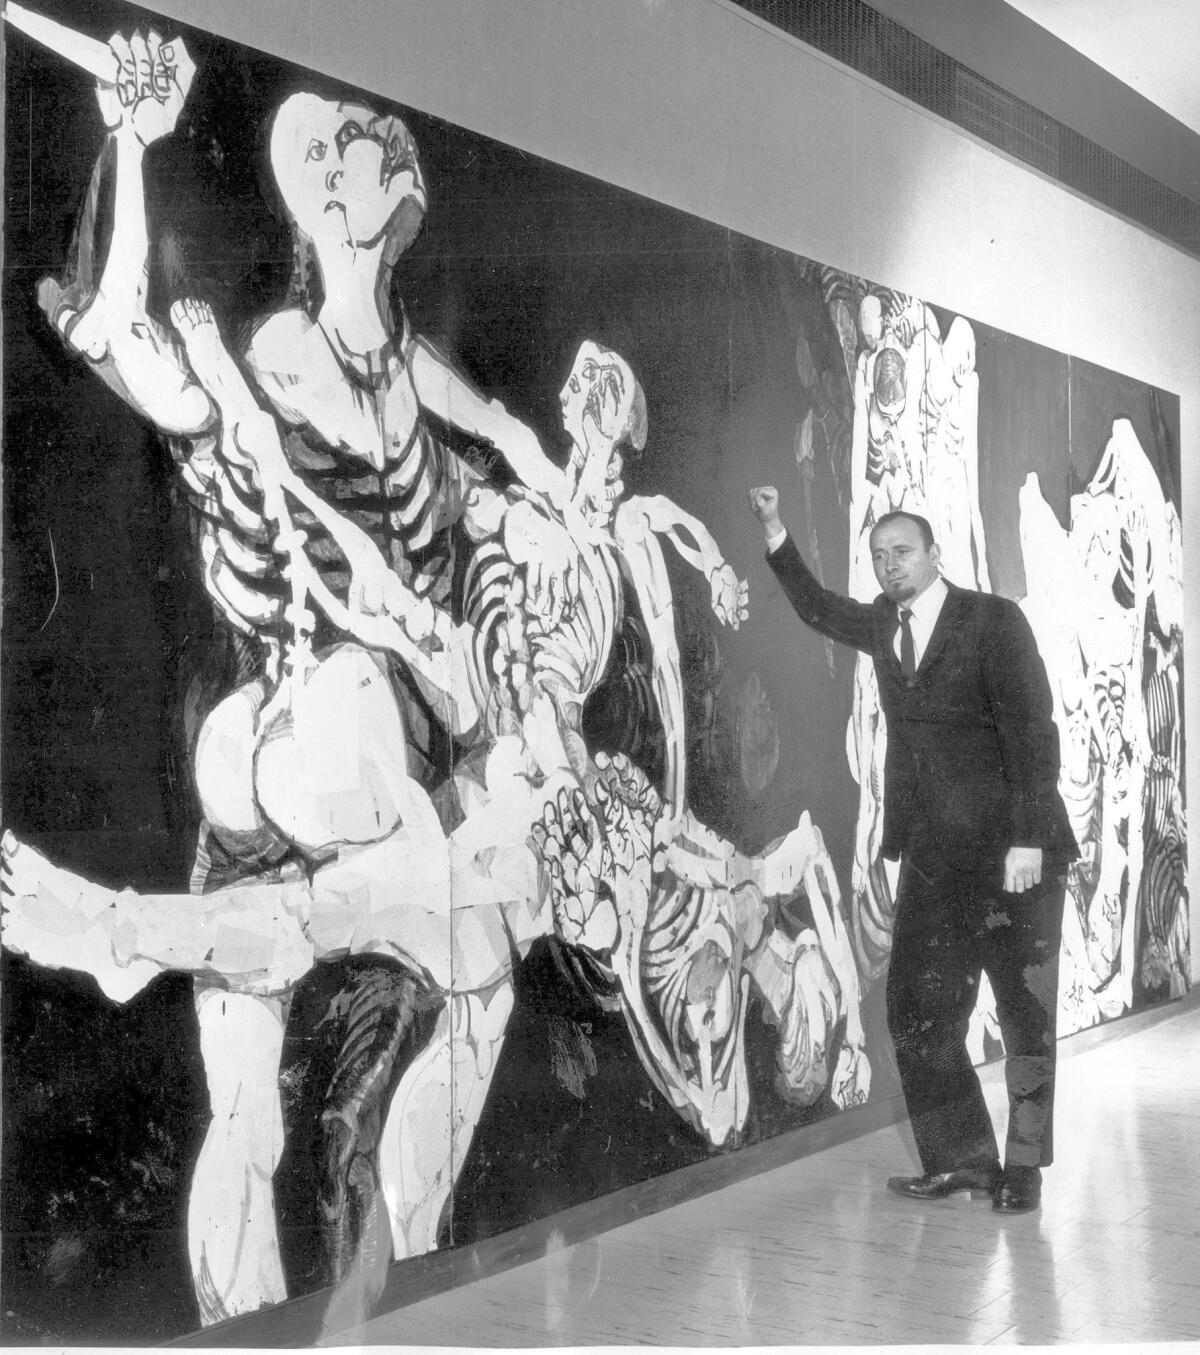 Connor Everts in 1962 with his mural "Thirst For Extinction," at Valley State College, now Cal State Northridge.